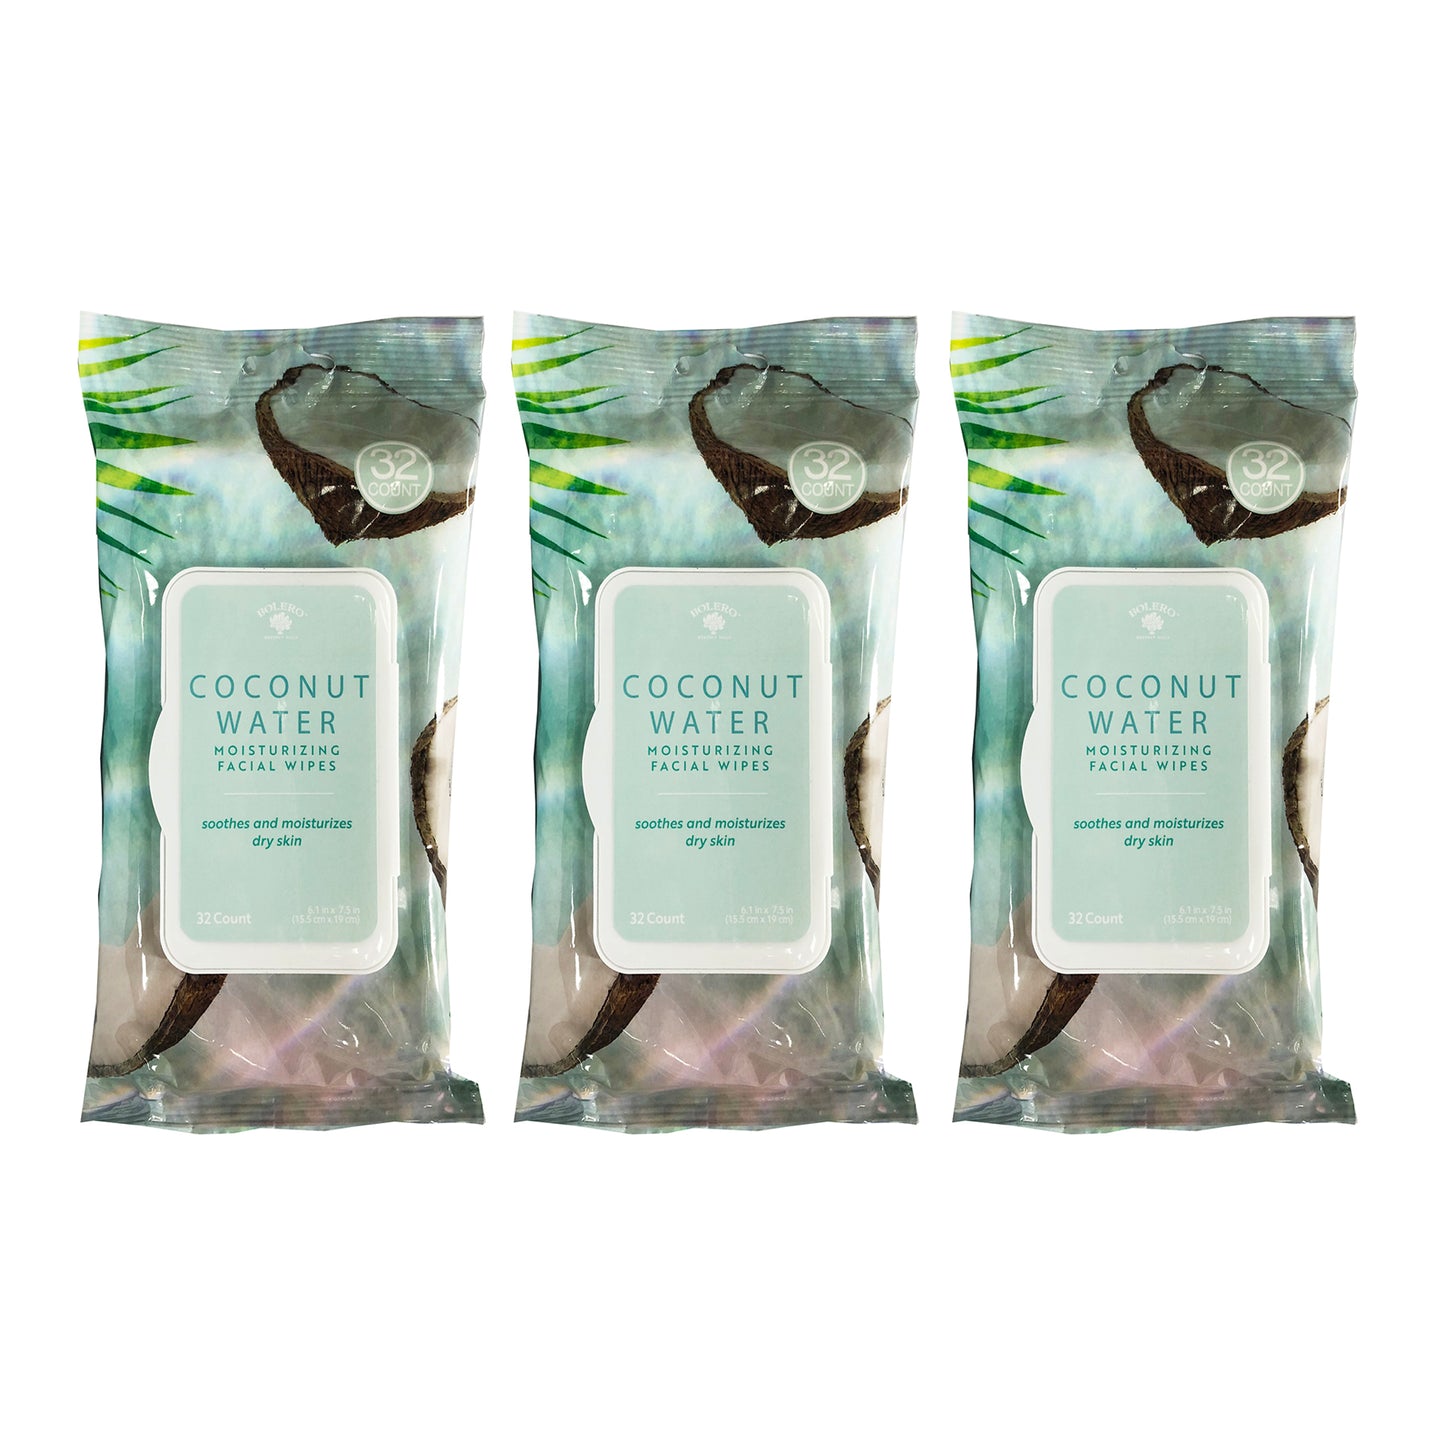 Facial Wipes Coconut Water 32 ct by Bolero "3-PACK"